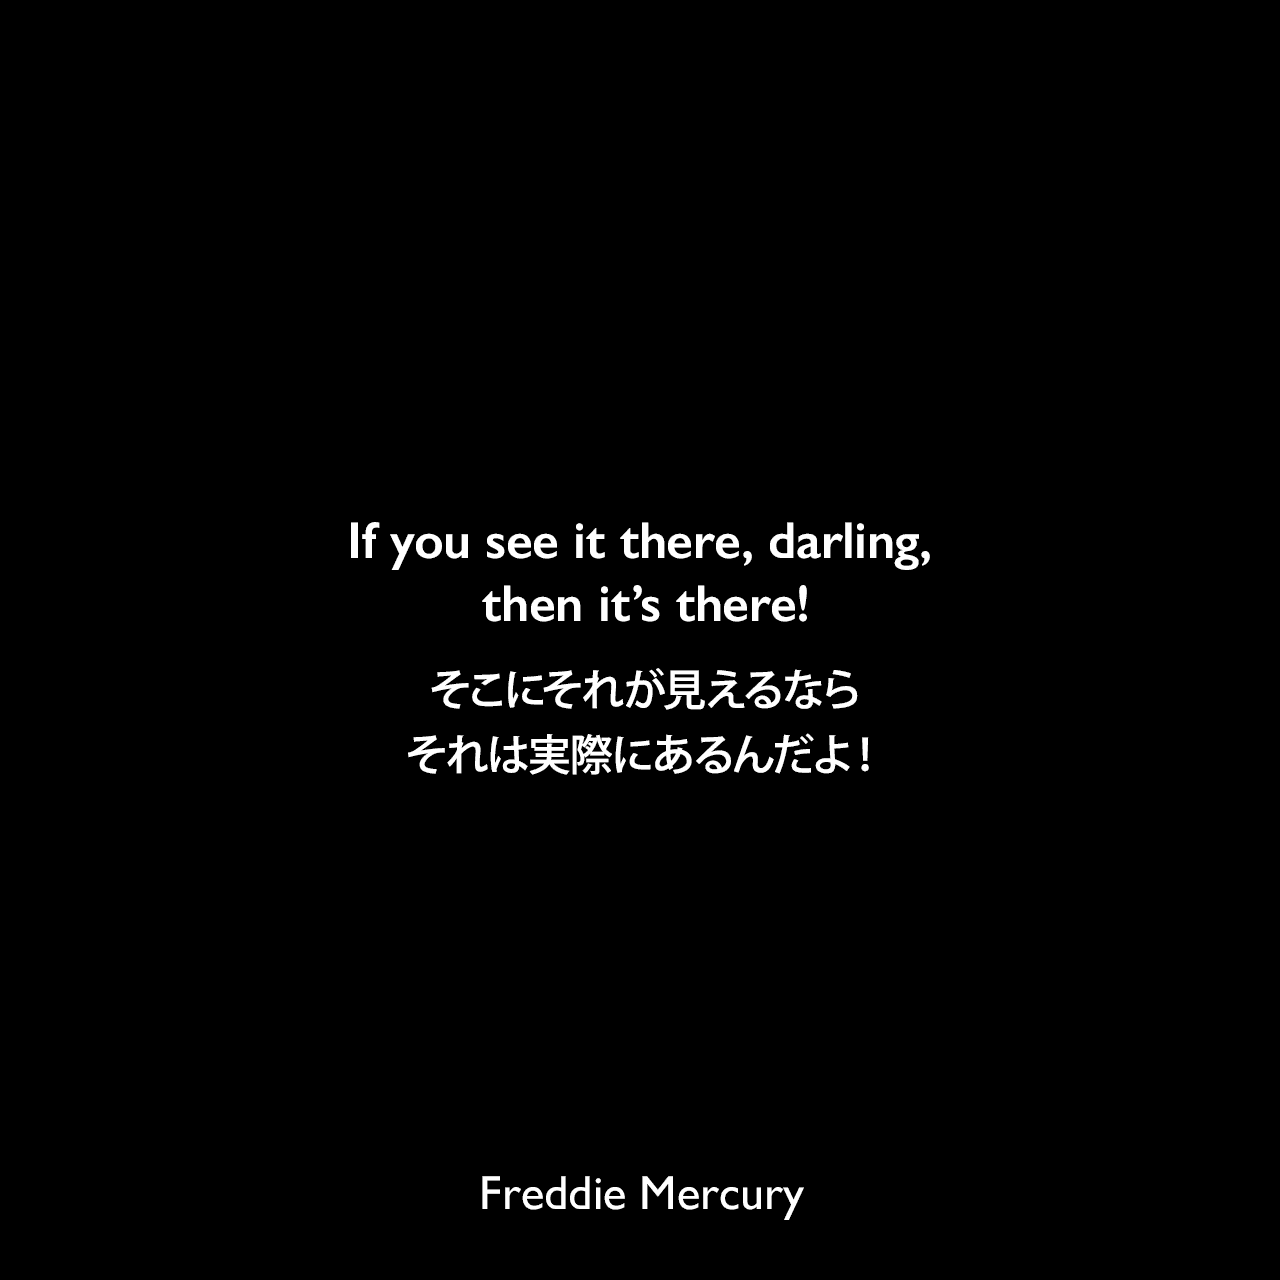 If you see it there, darling, then it’s there!そこにそれが見えるなら、それは実際にあるんだよ！Freddie Mercury